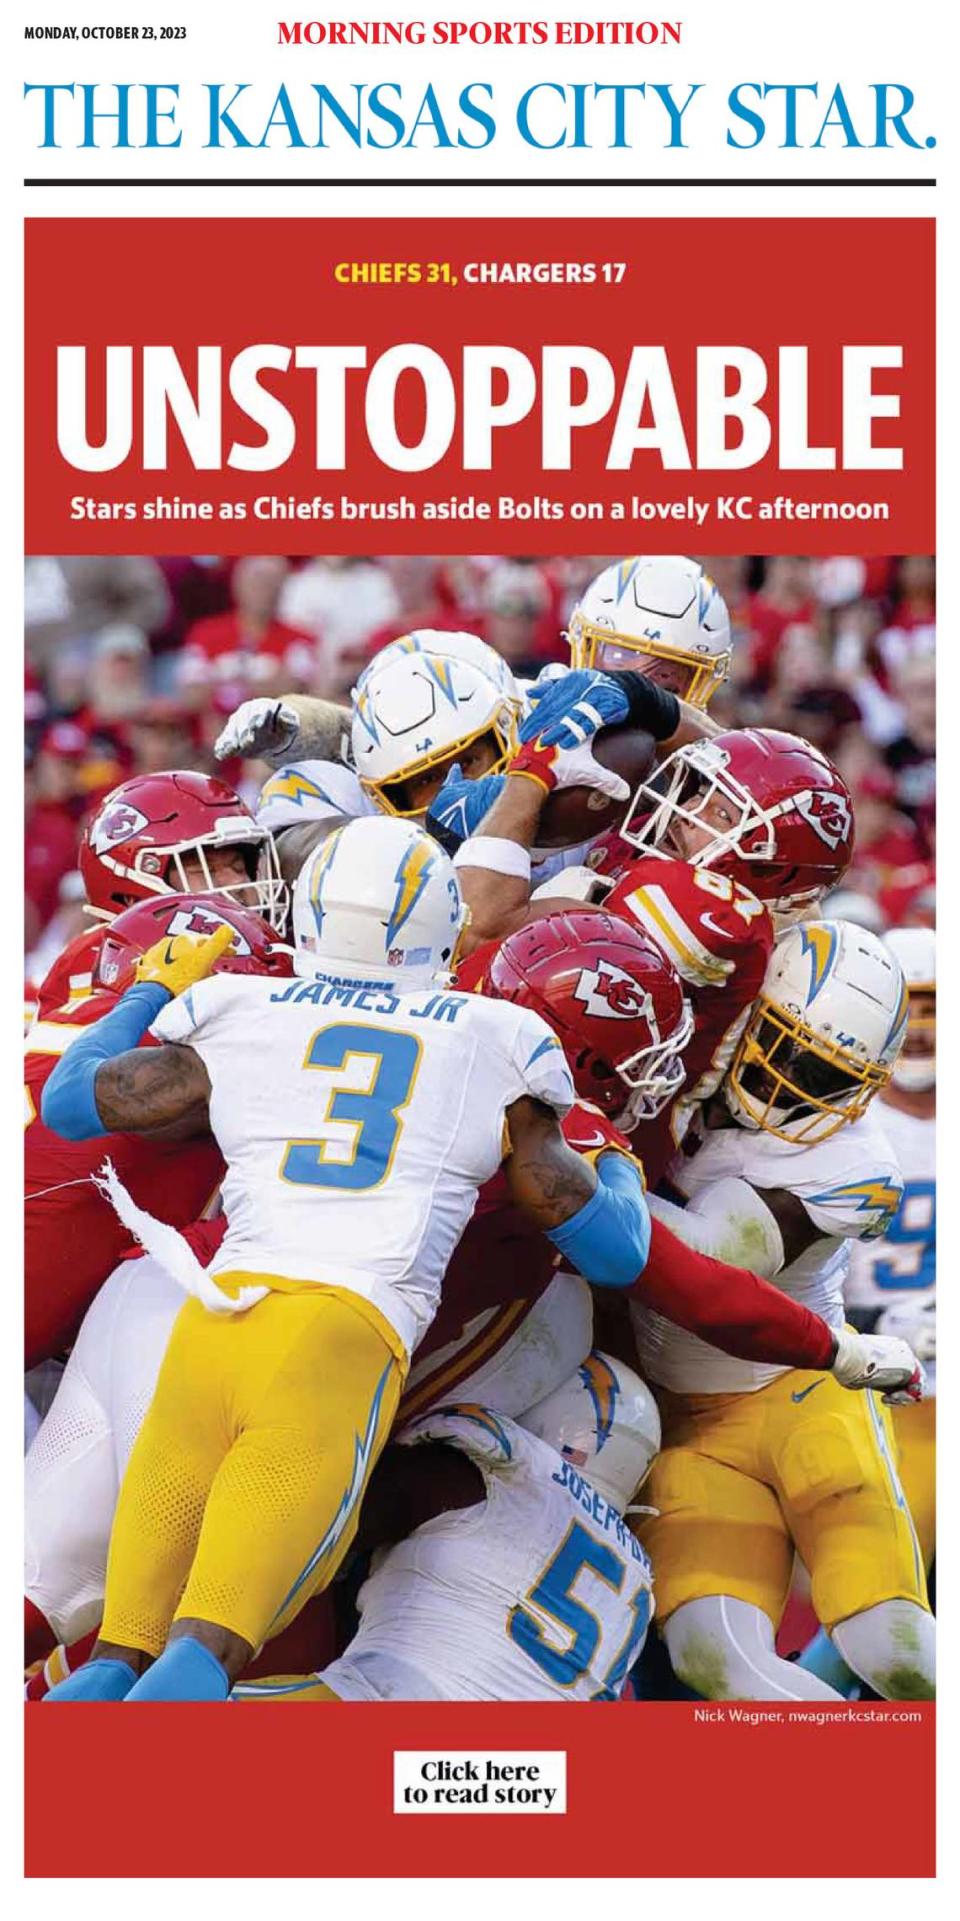 We picked the fourth frame in this series. Kelce appearing to keep an eye out for the goal line and the lack of other obstructions in the shot made it the winner. Here is how the photo appeared on Monday’s cover of the Morning Sports Edition.